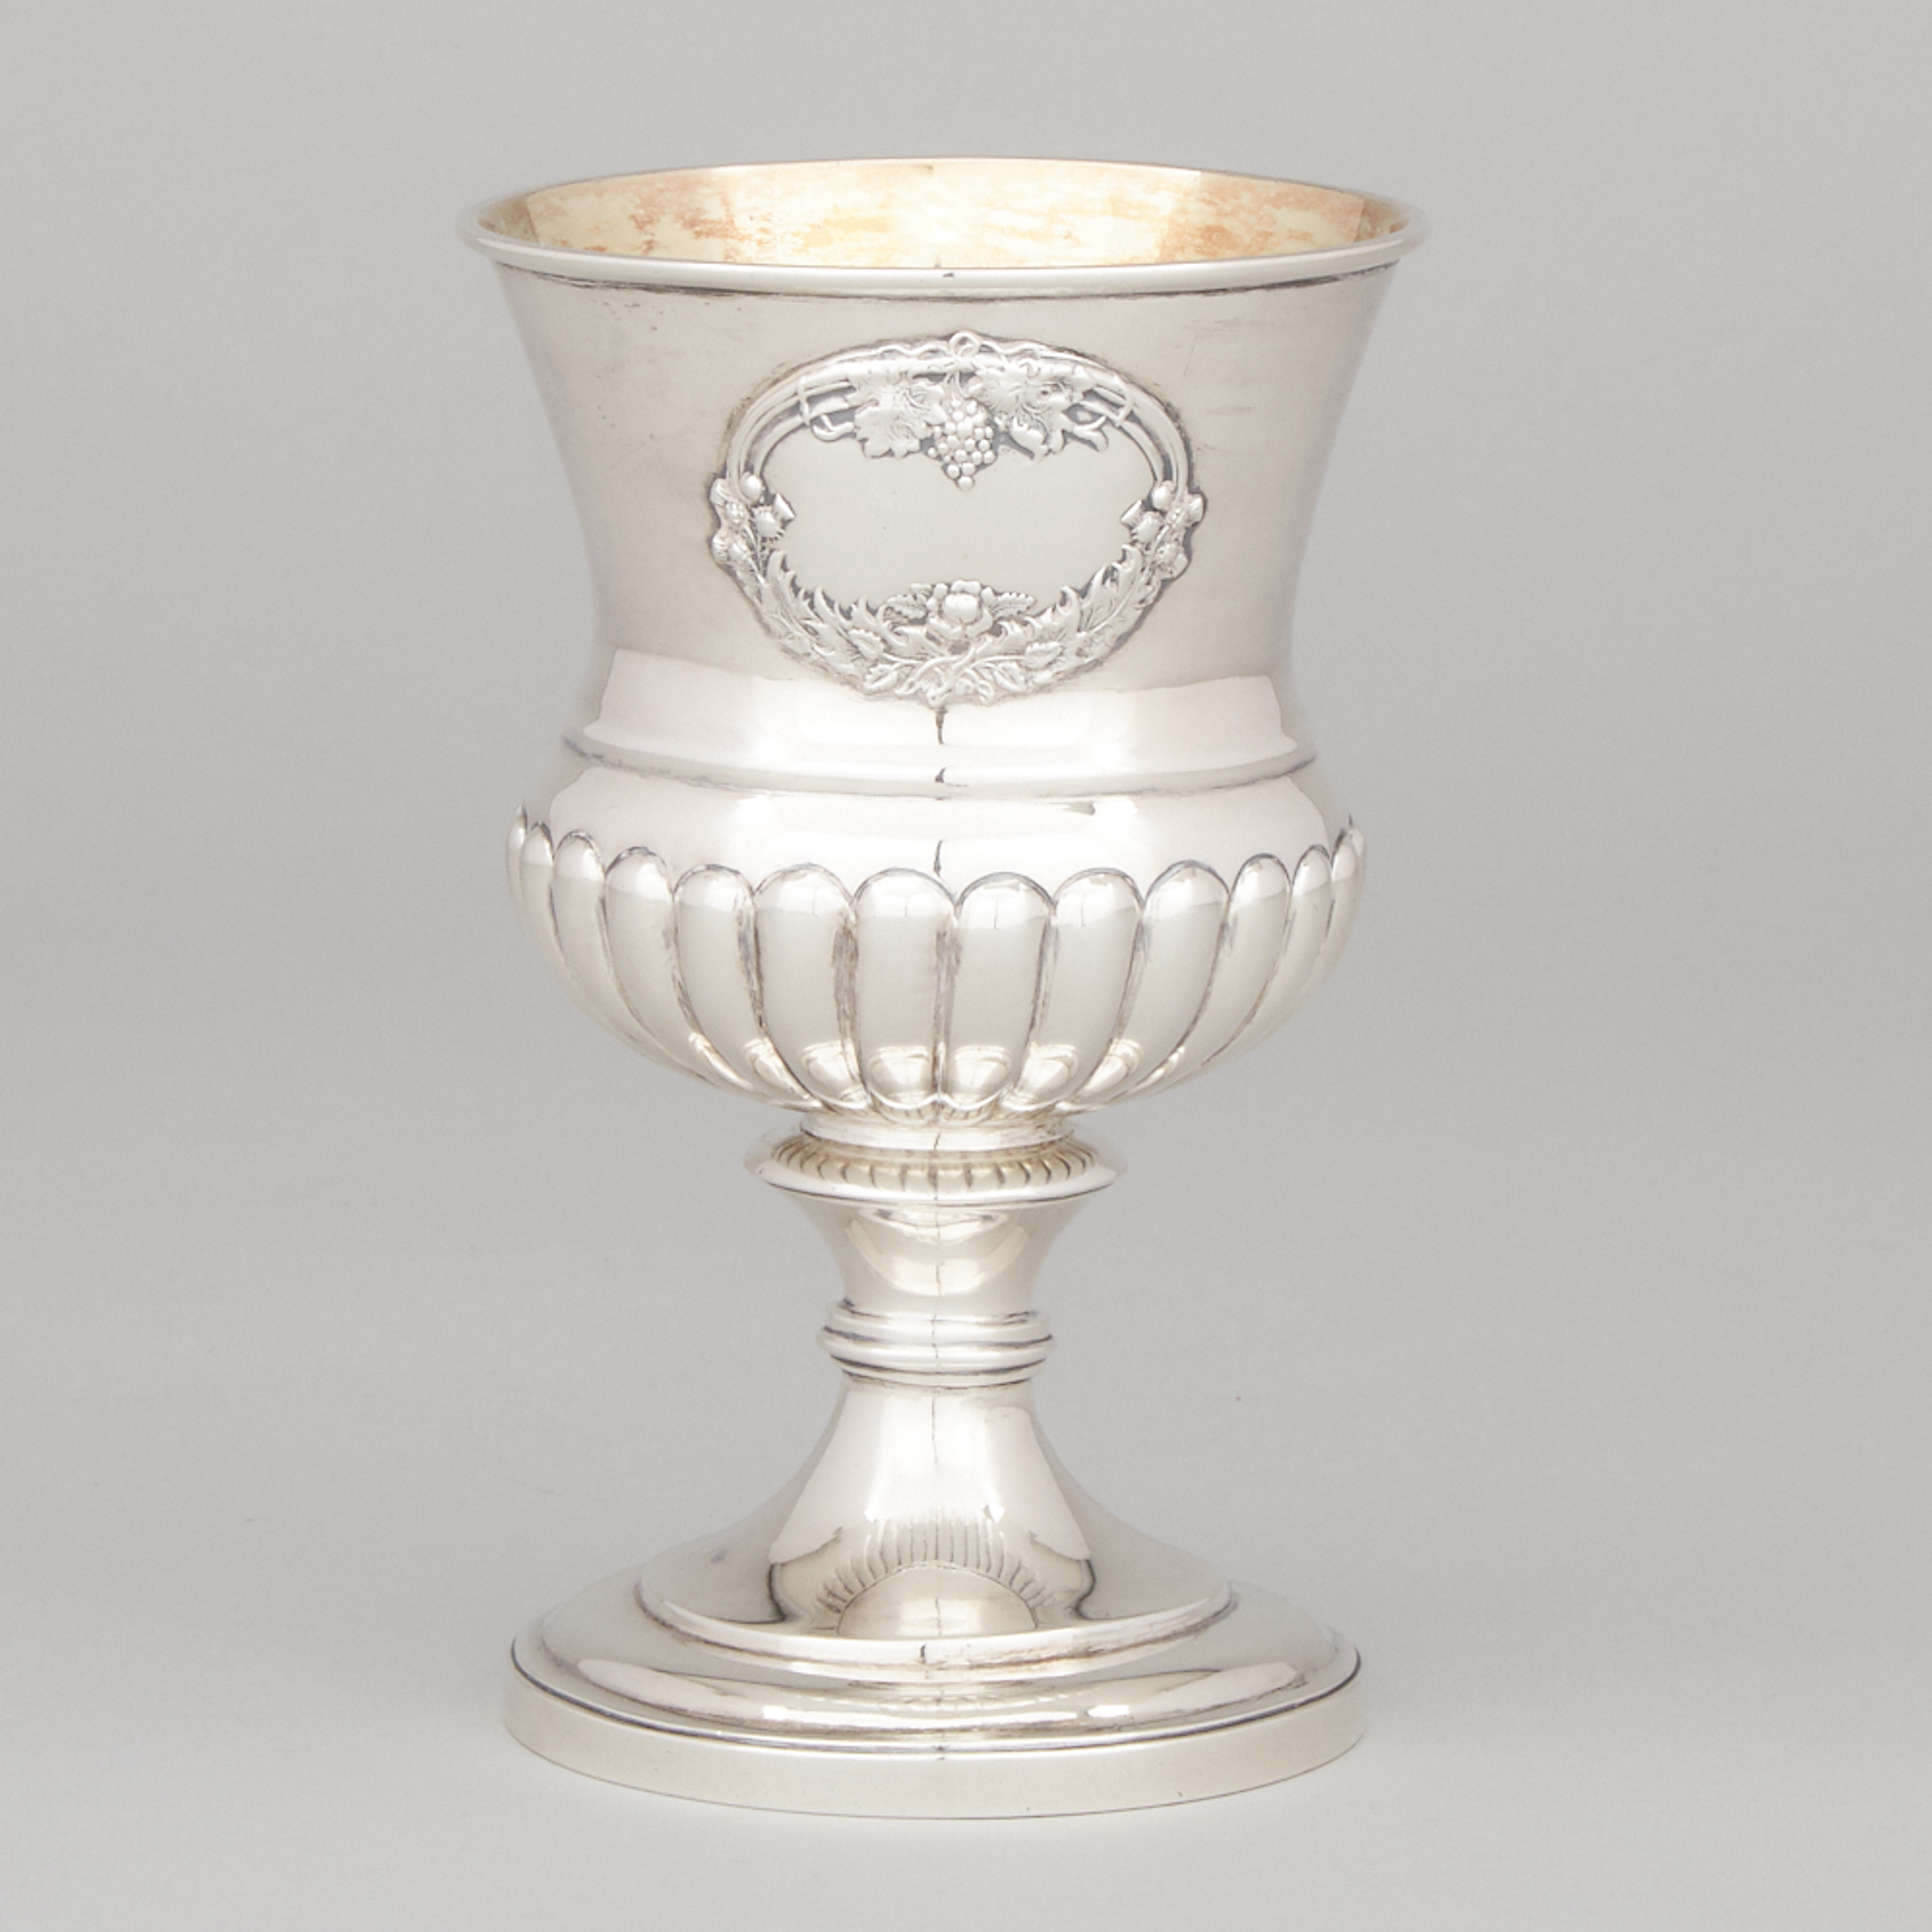 Canadian Silver Thistle Shaped Goblet, William Farquhar, Montreal, Que., c.1825-30 